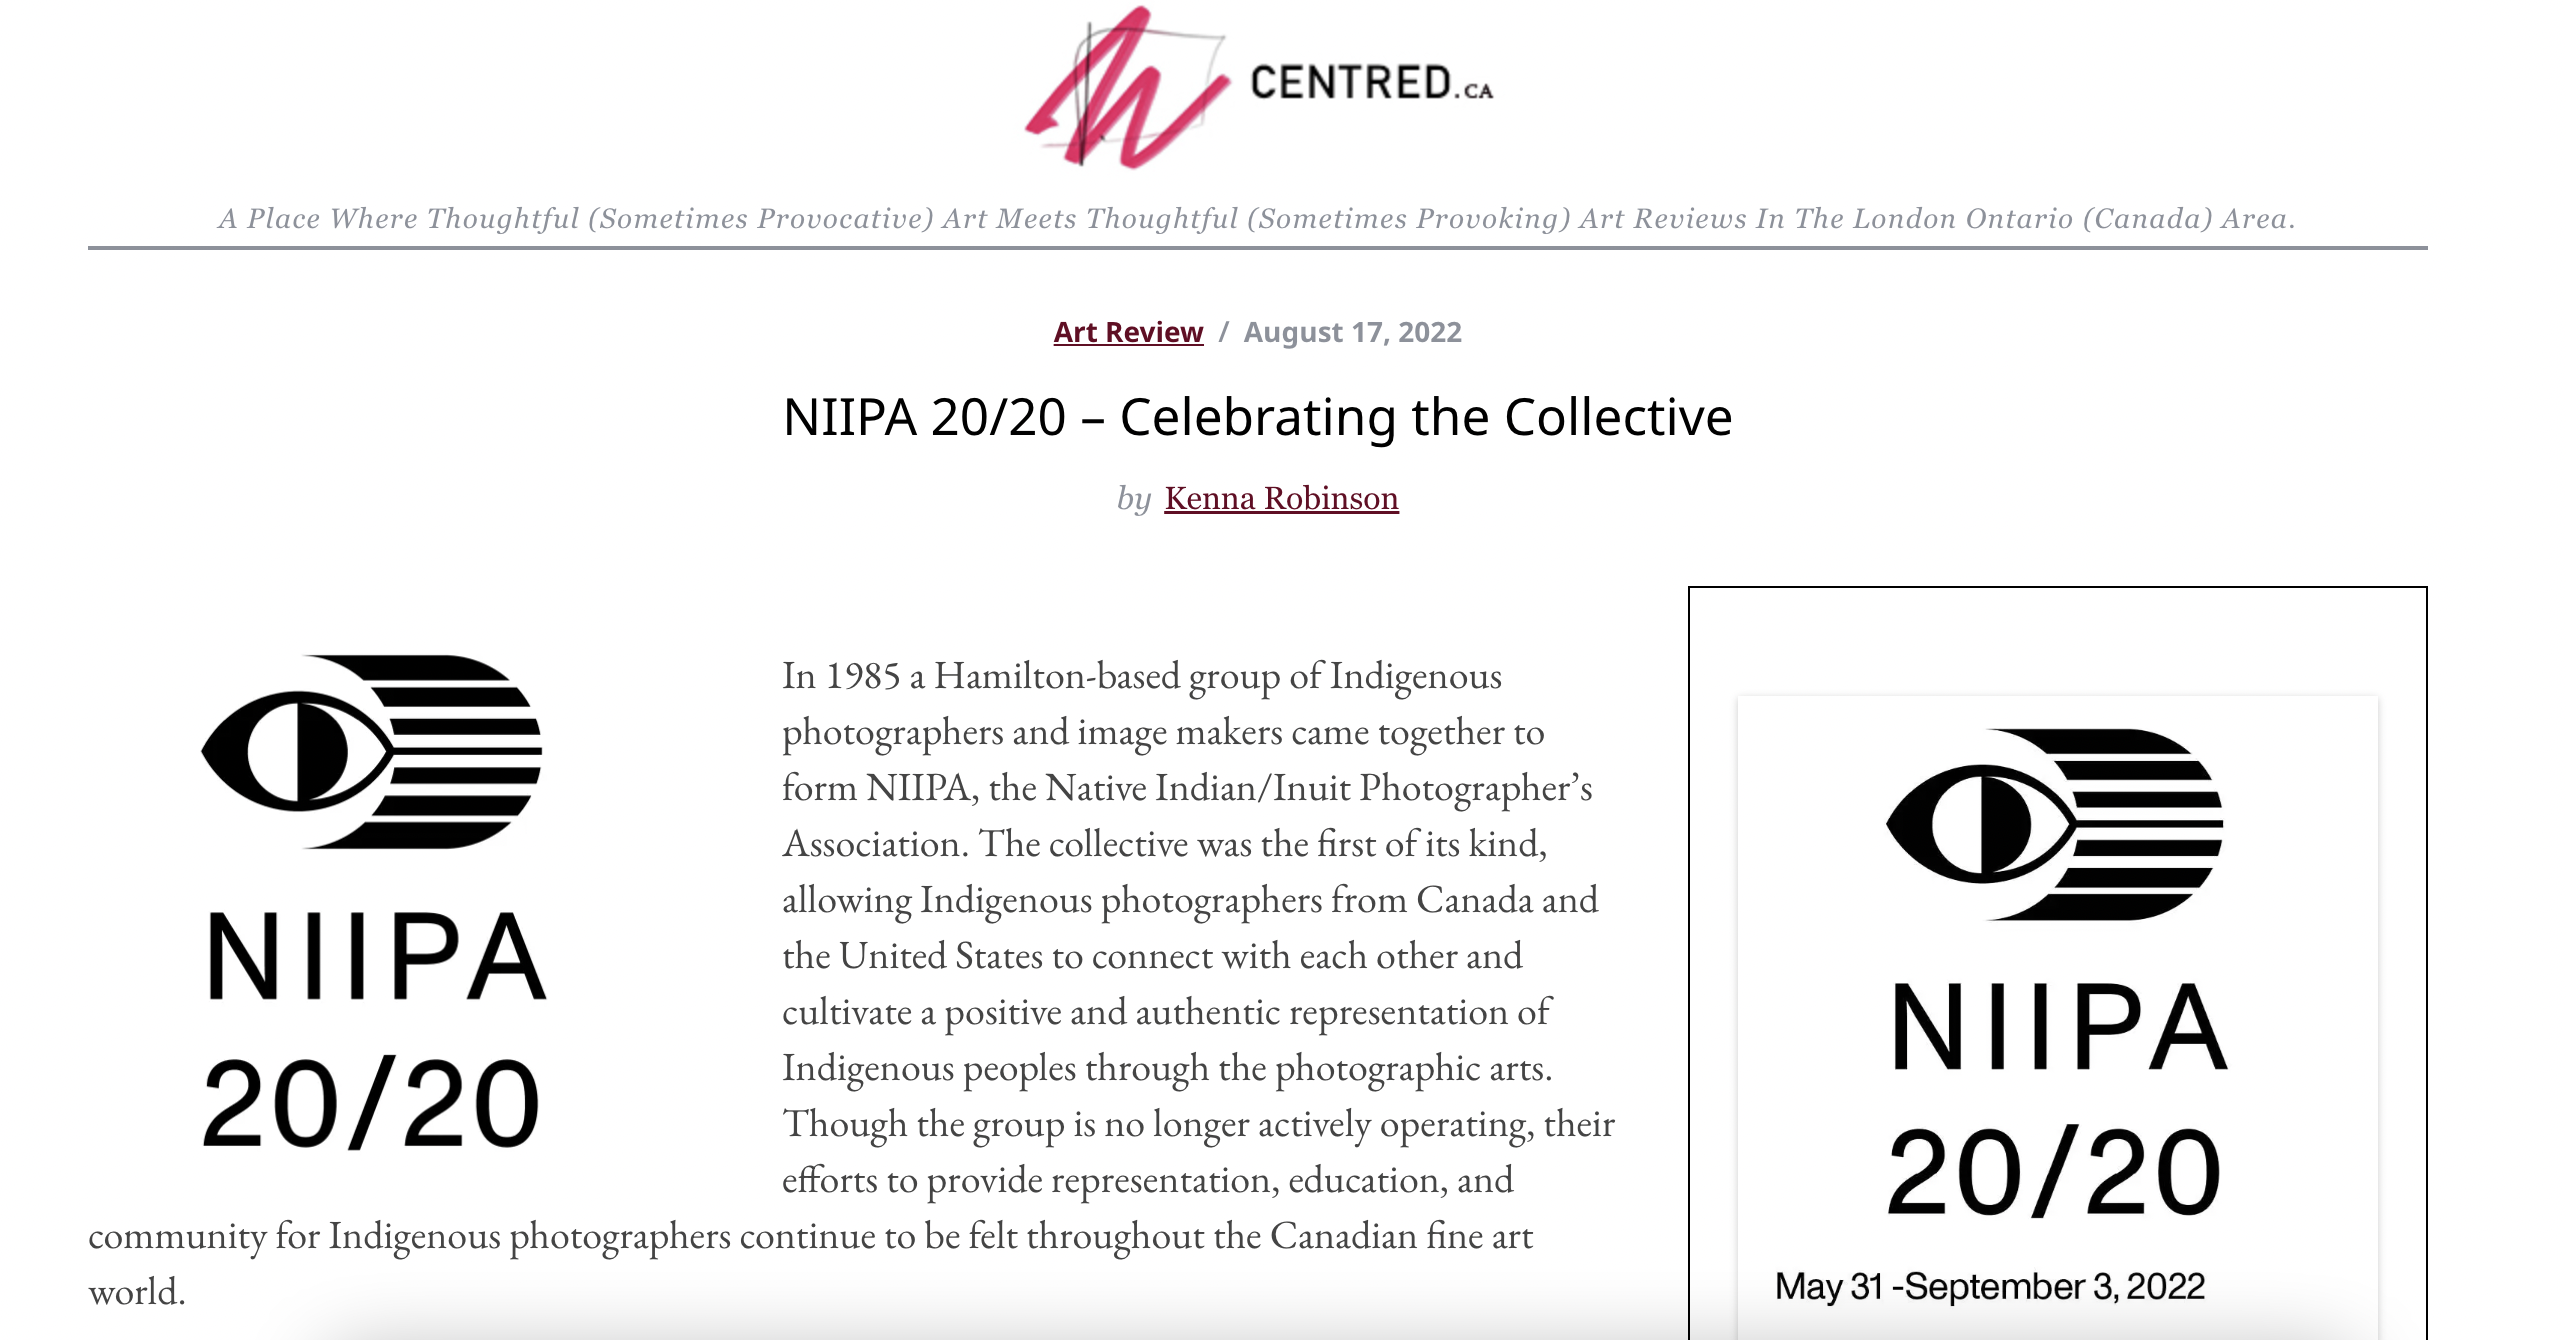 NIIPA 20/20 Reviewed in Centred.ca